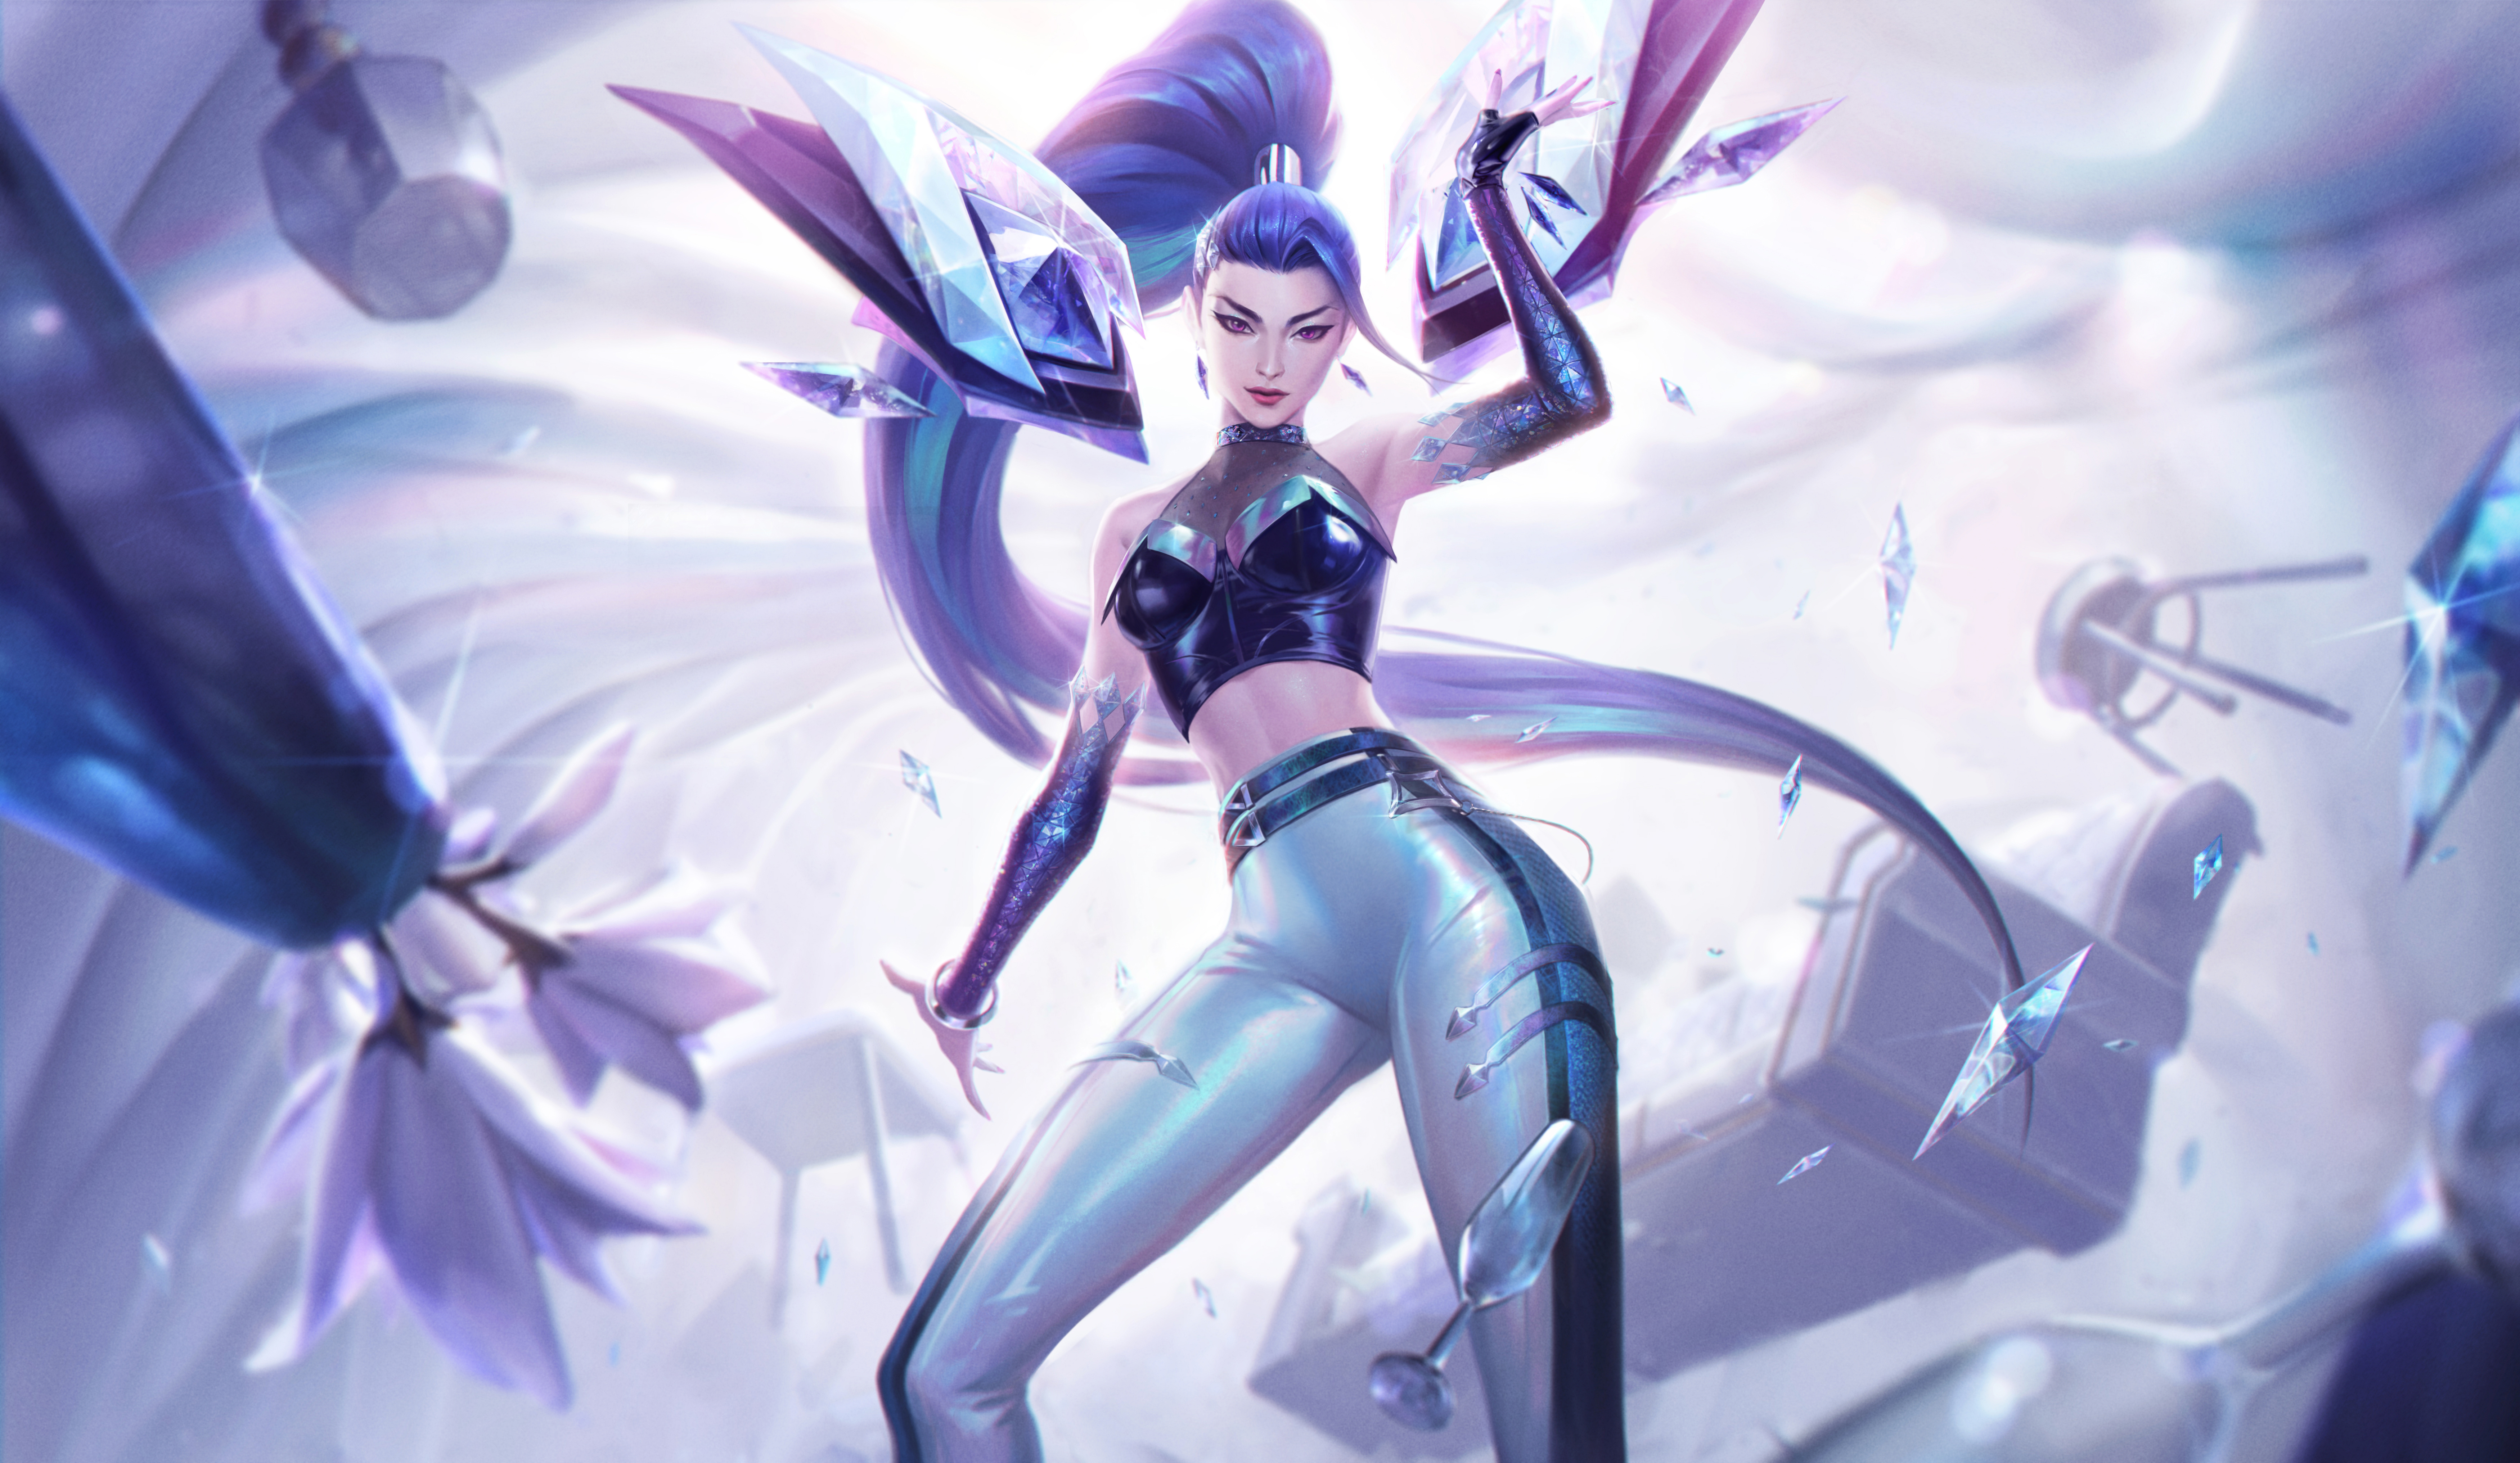 KDA ALL OUT凱莎.jpg